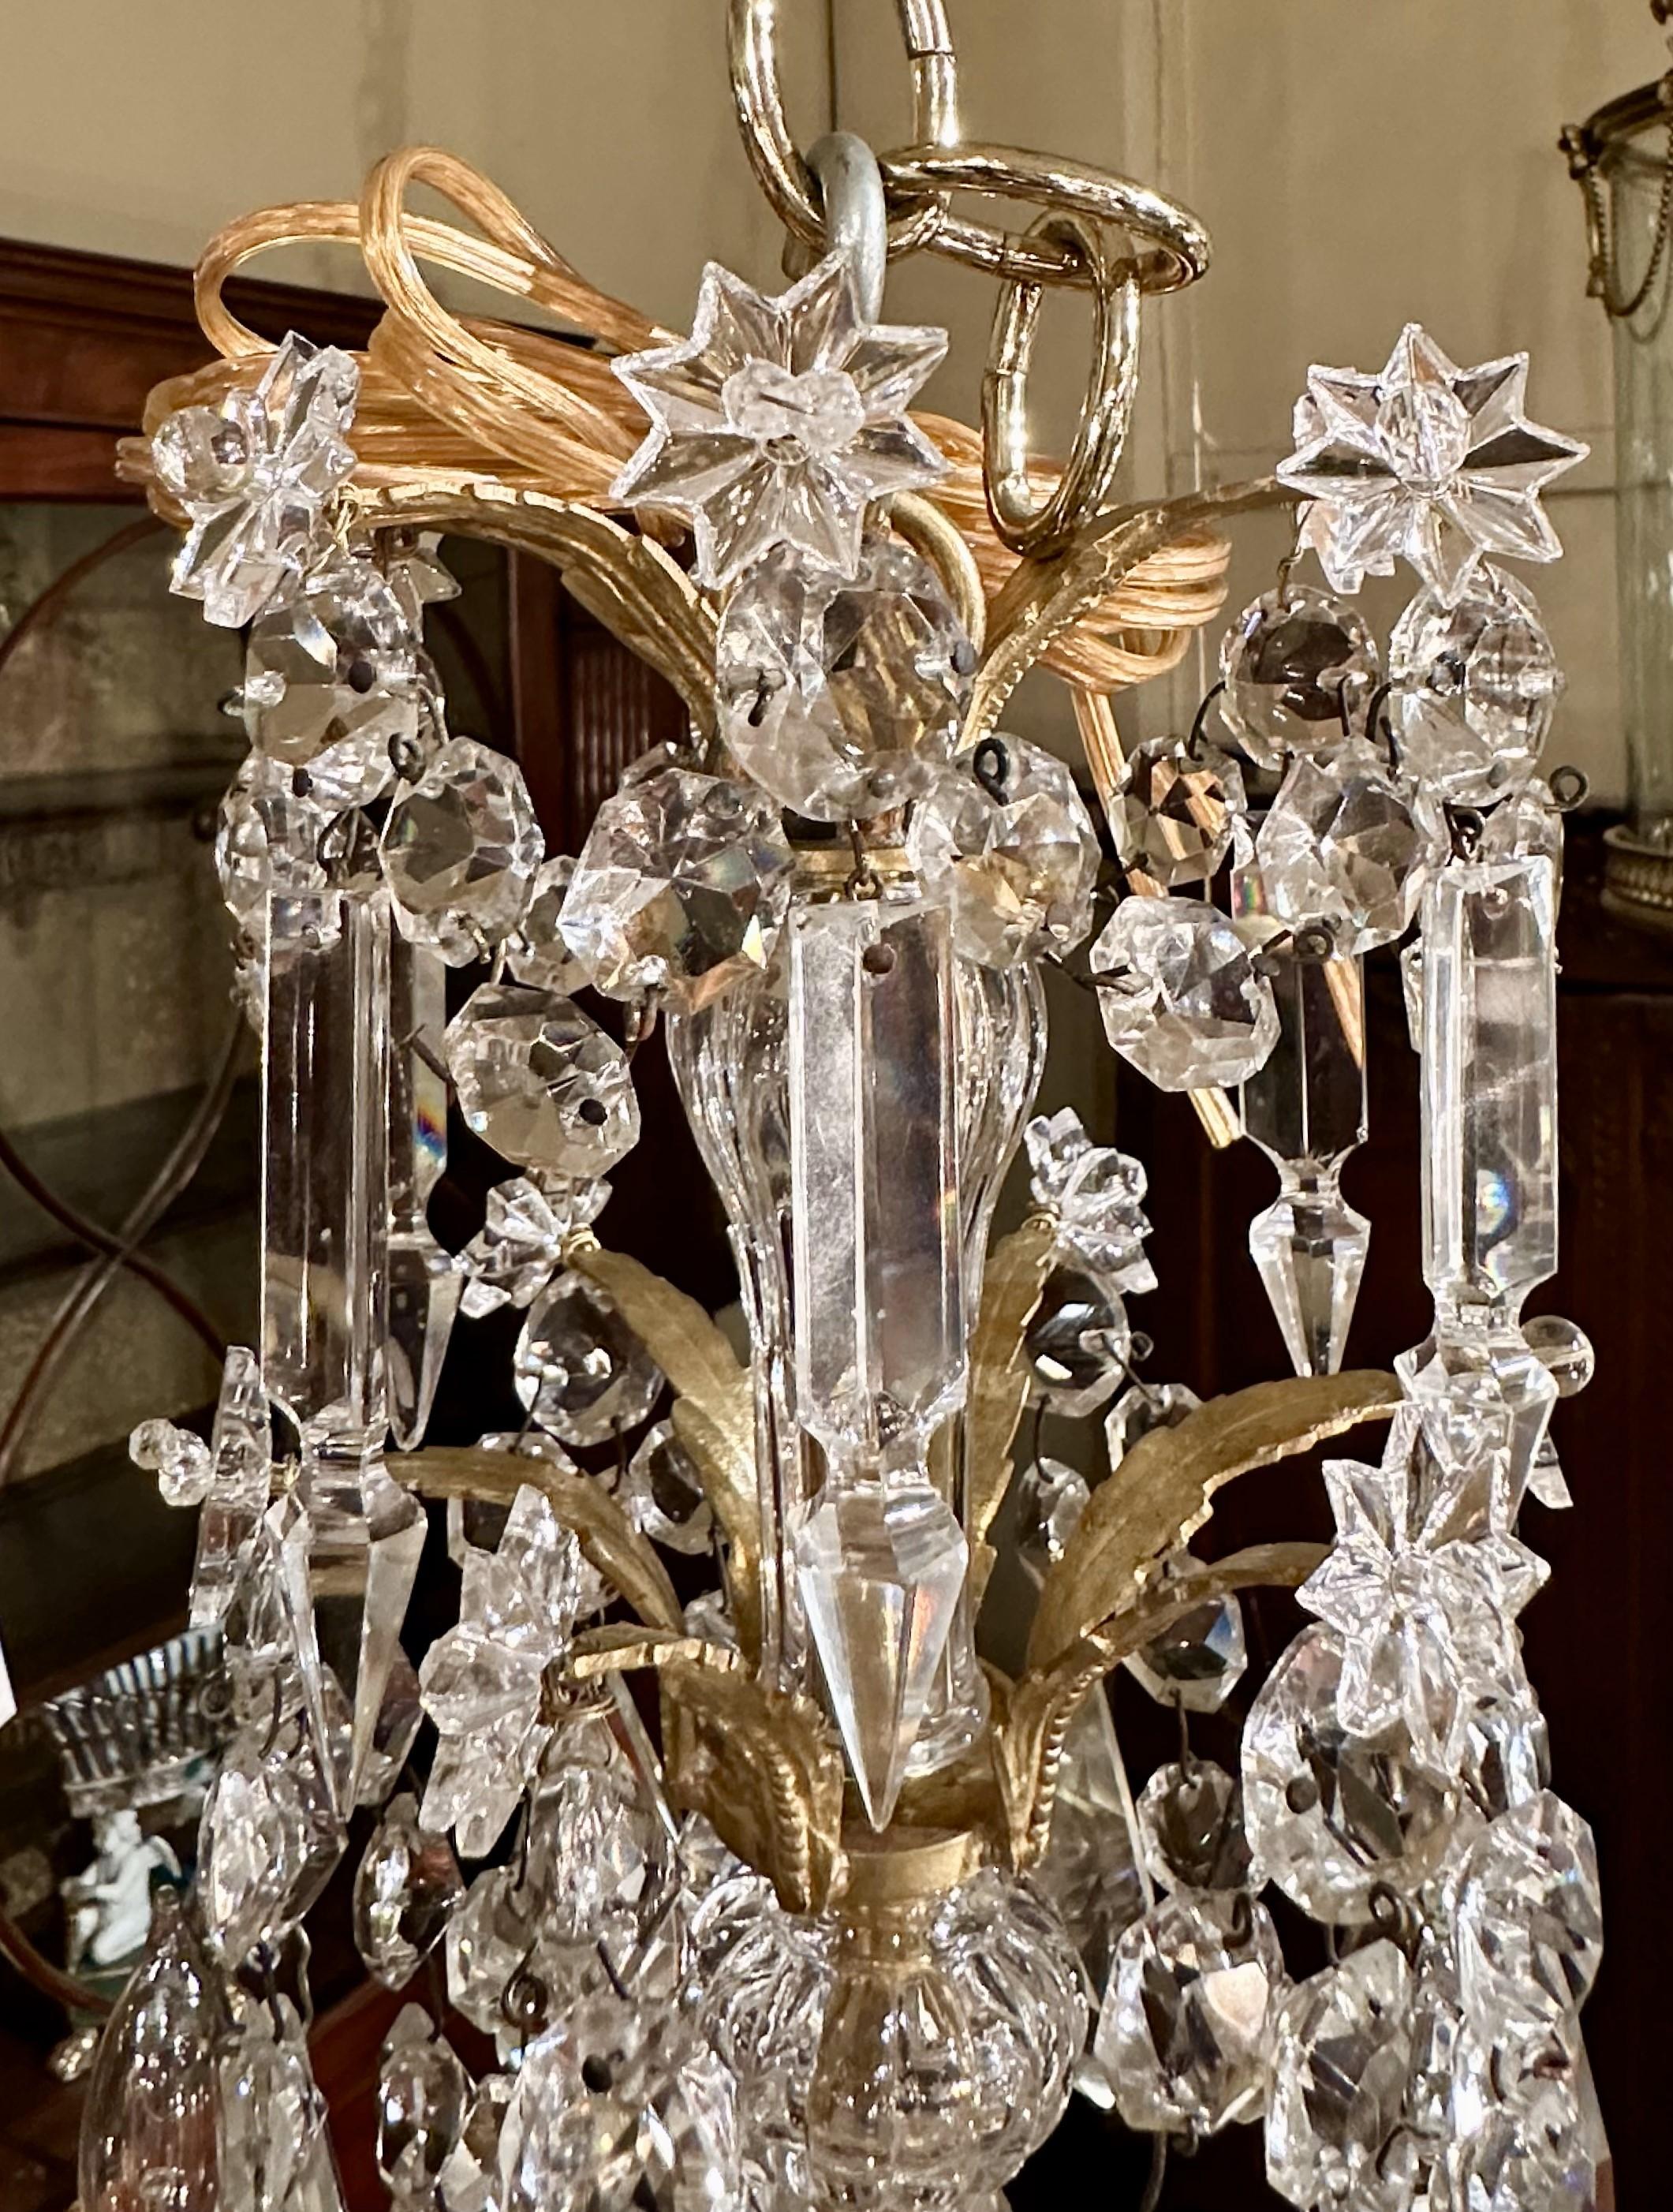 Rare Small Antique French Napoleon III Fine Gold Bronze and Cut Crystal Chandelier, Circa 1885.
